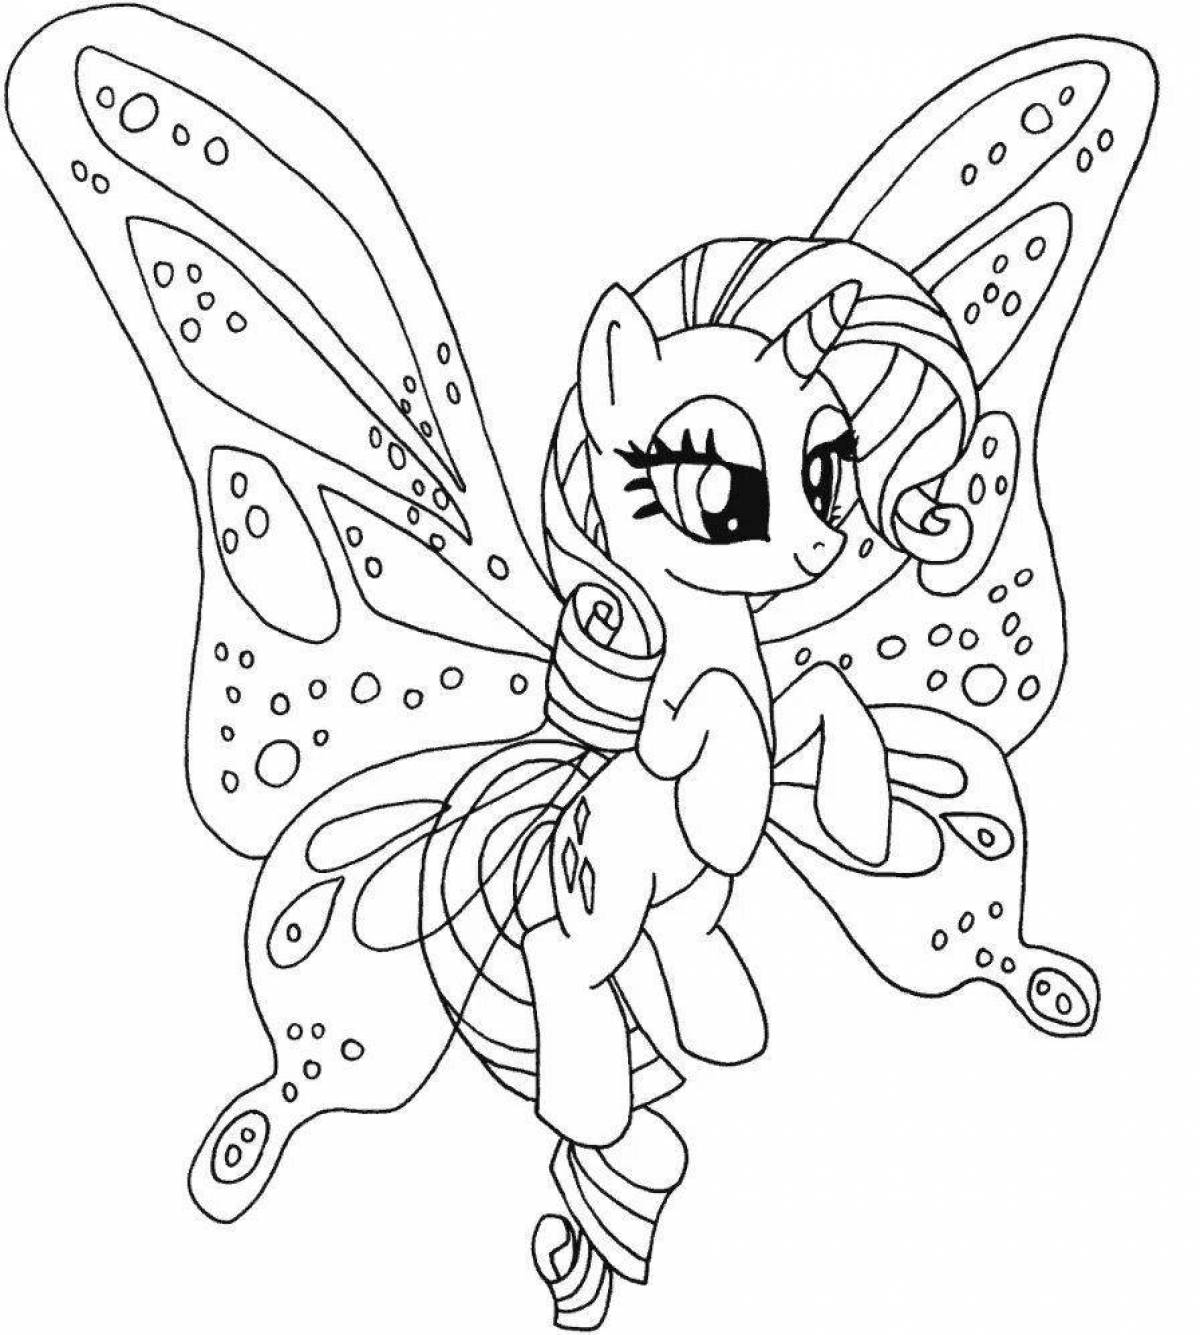 Coloring book bright baby pony